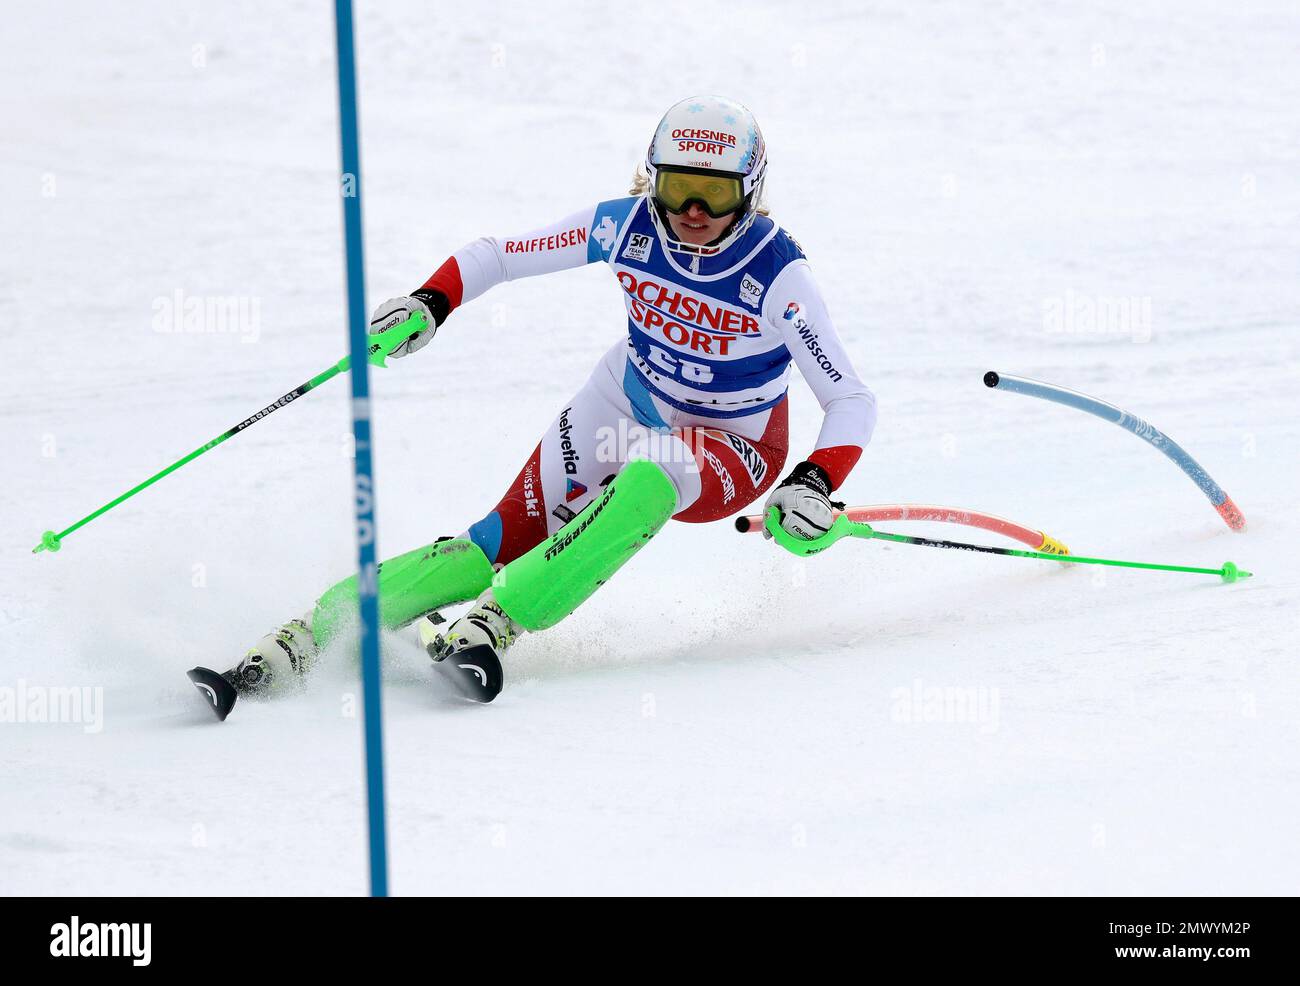 Denise Feierabend, of Switzerland, competes during her first run in the  women's FIS Alpine Skiing World Cup slalom race, Sunday, Nov. 27, 2016, in  Killington, Vt. (AP Photo/Charles Krupa Stock Photo - Alamy